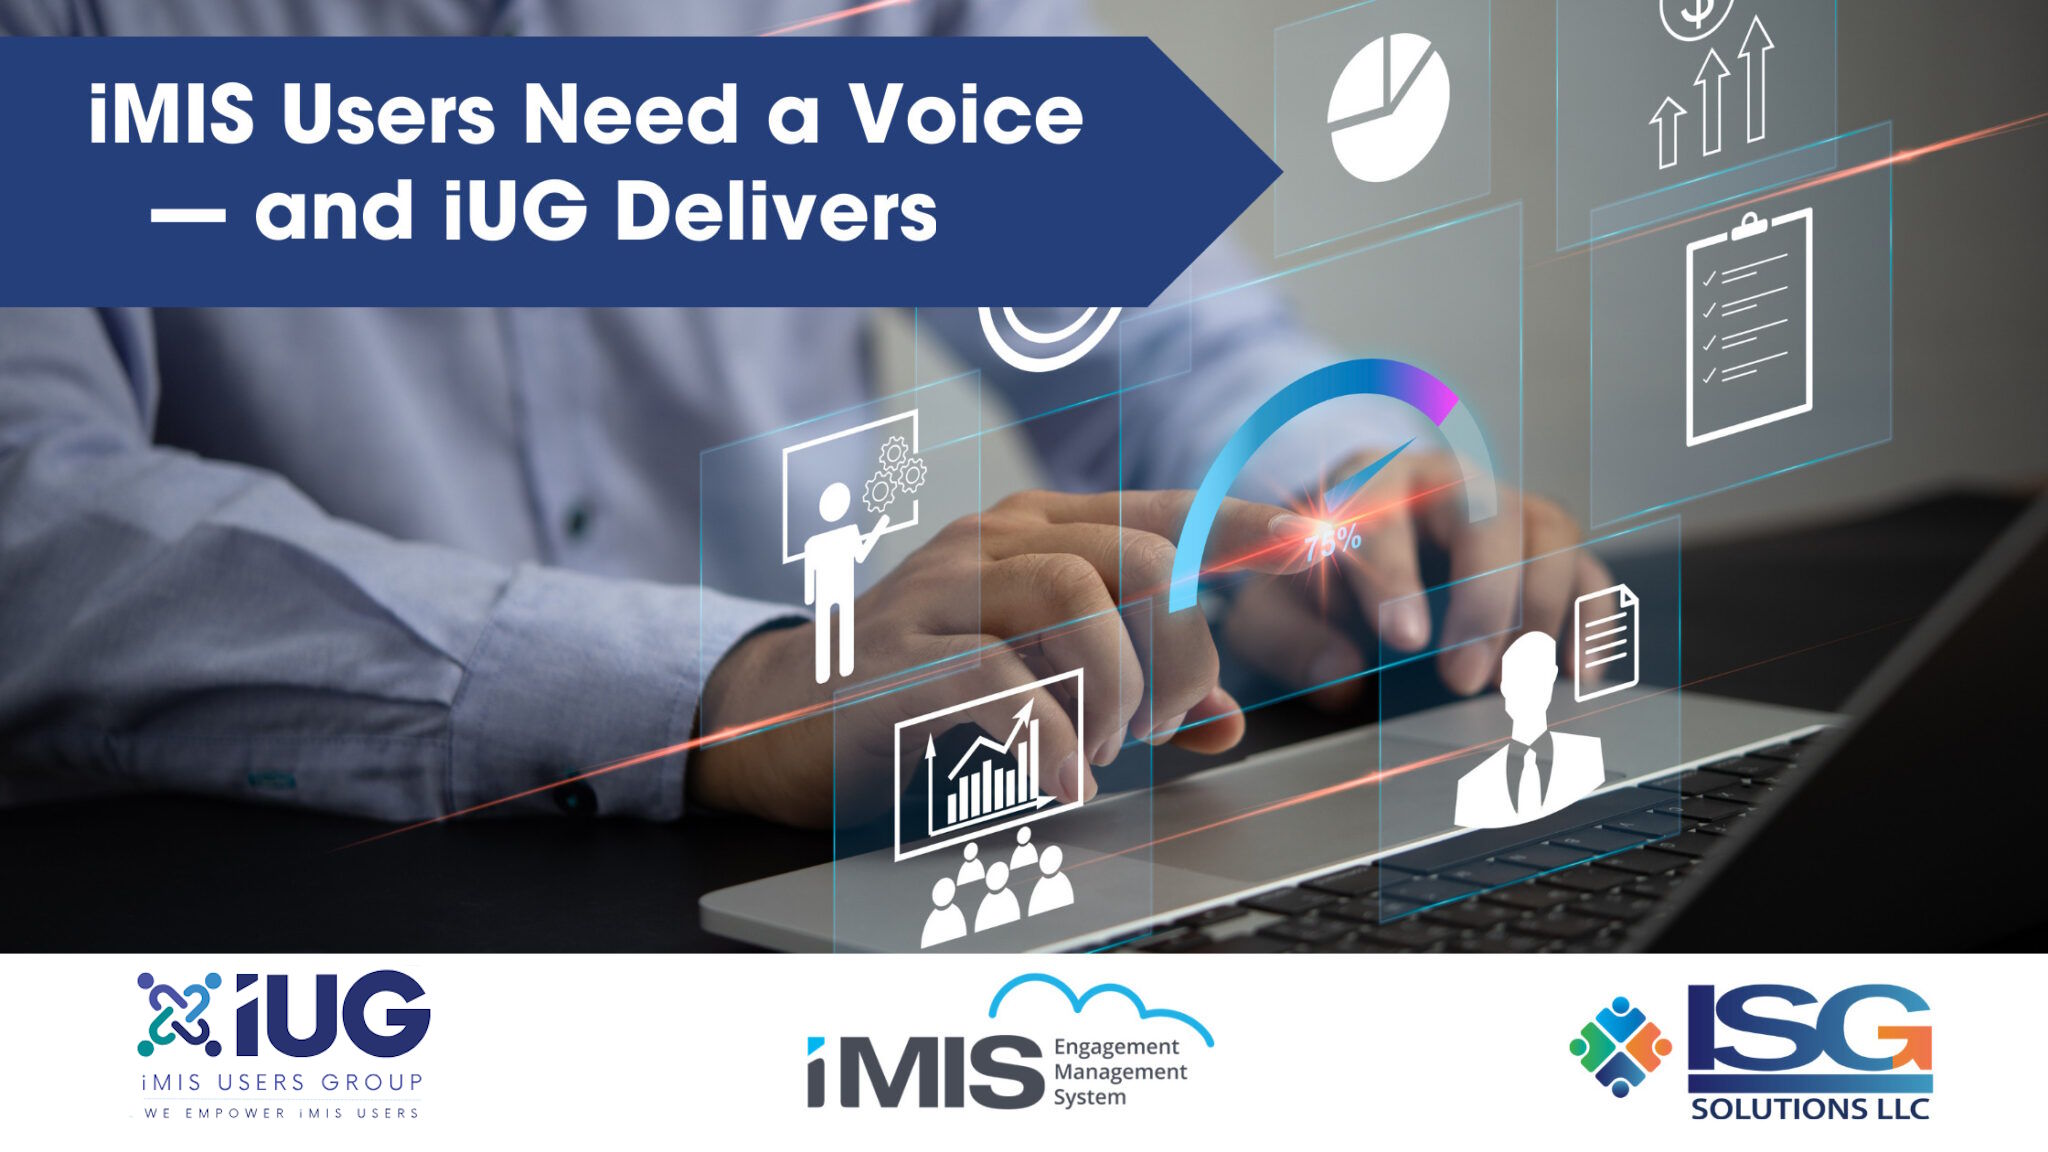 iMIS Users Need a Voice — and iUG Delivers